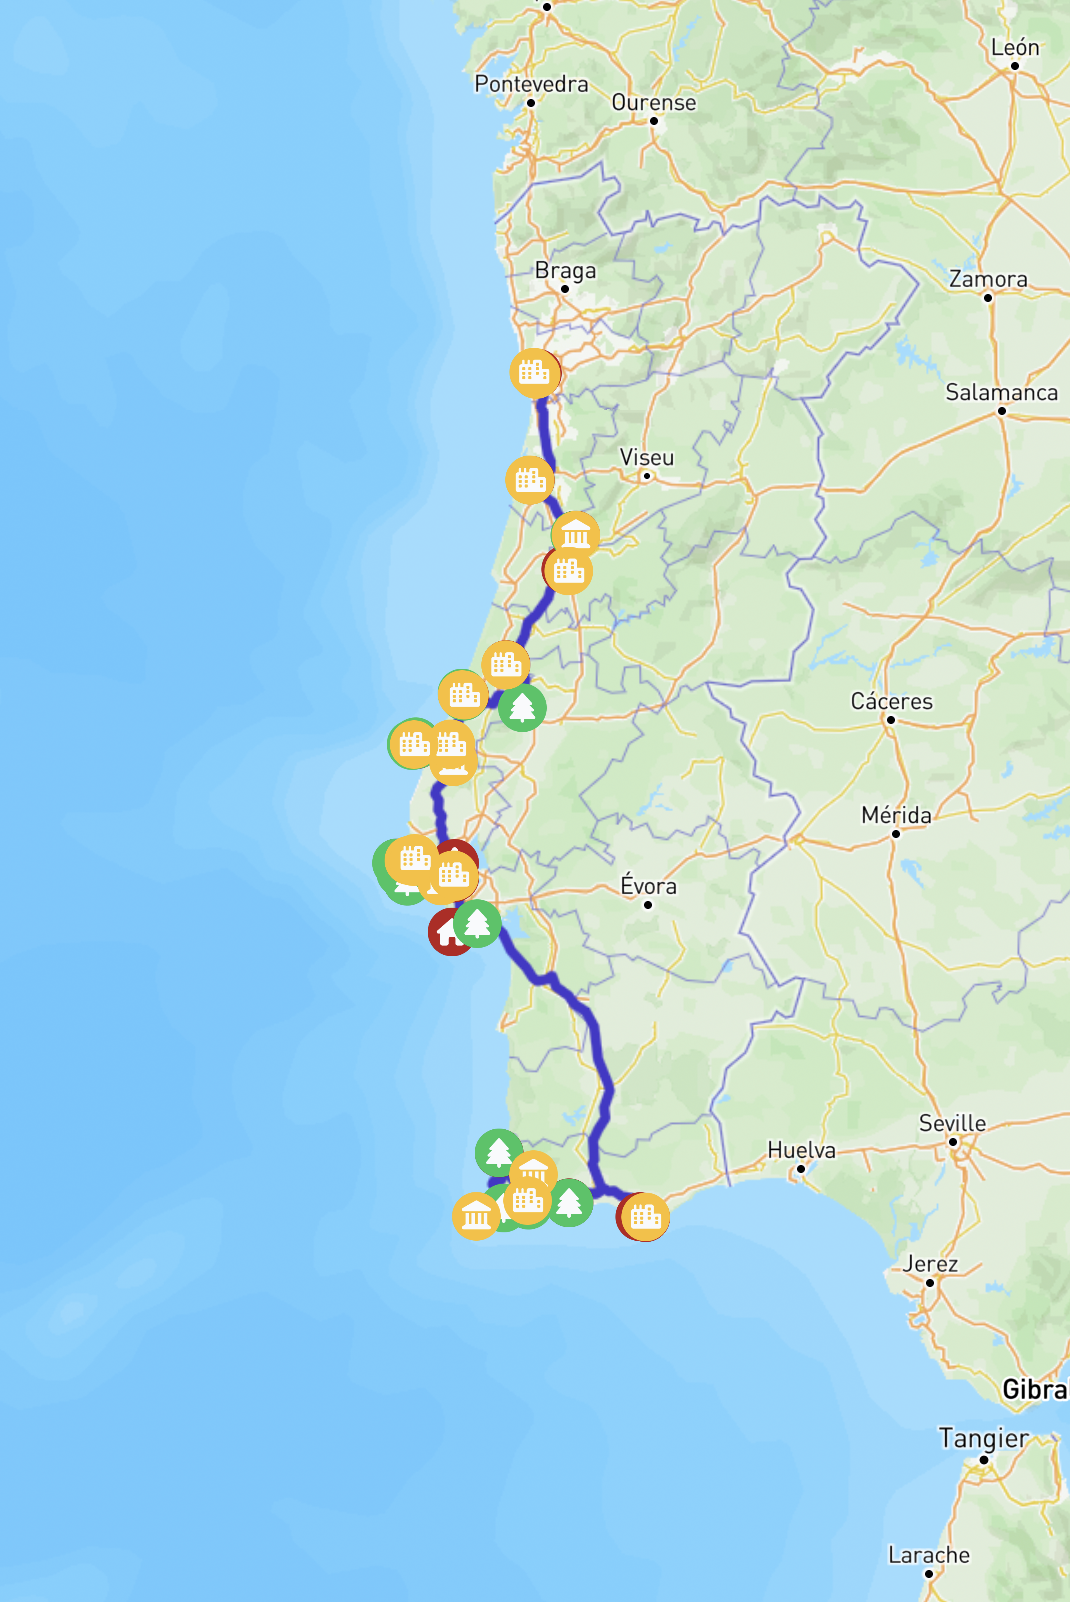 A map showing the route across Portugal.